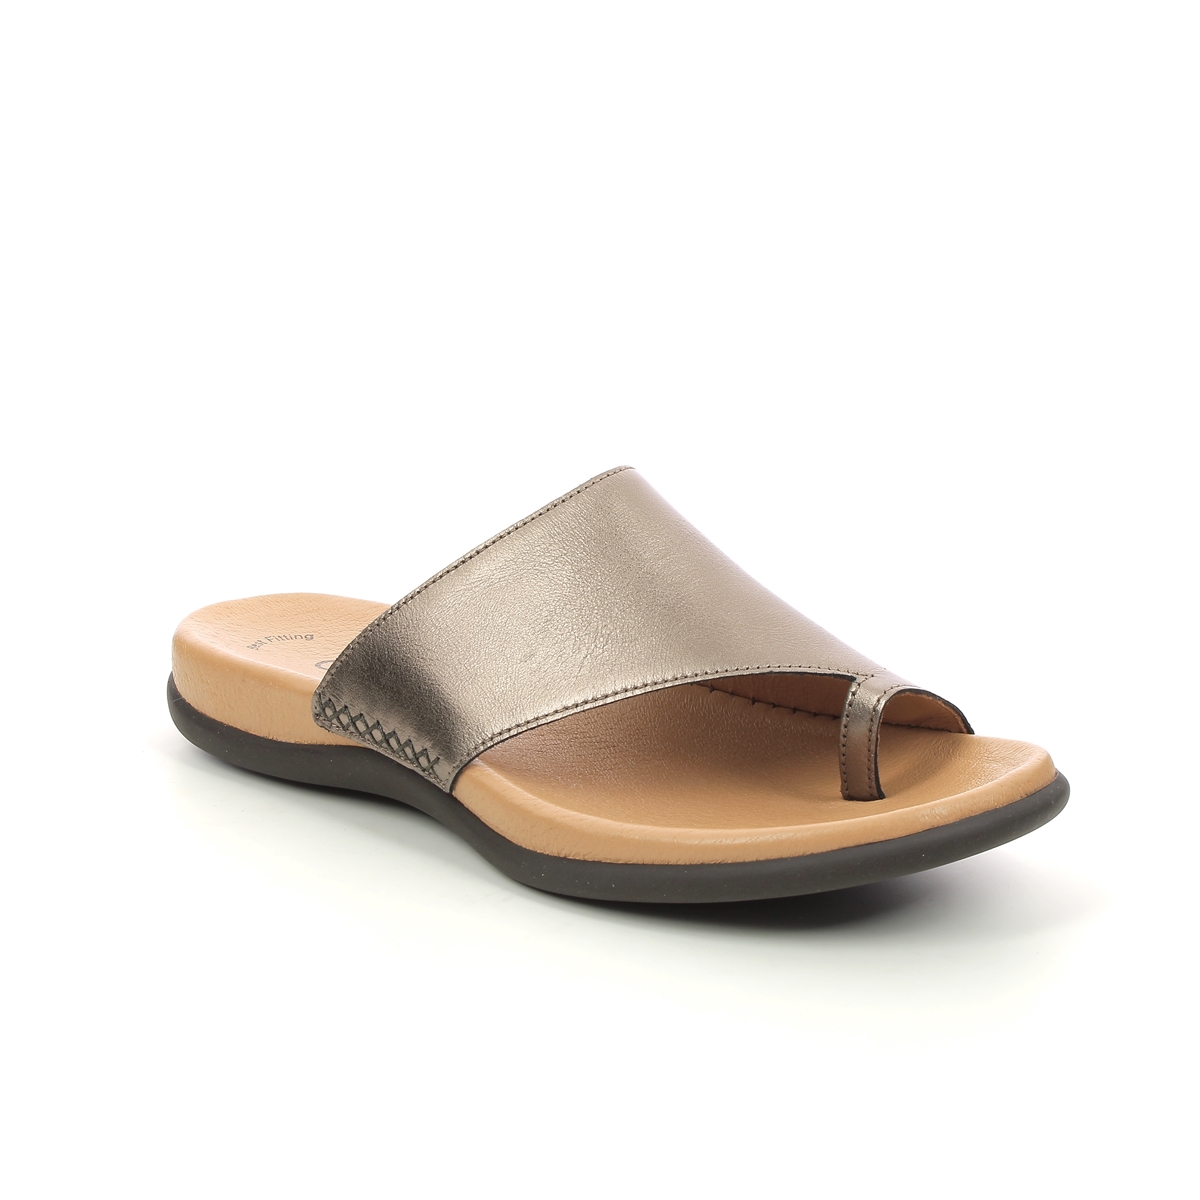 Gabor Lanzarote Metallic Womens Toe Post Sandals 43.700.51 in a Plain Leather in Size 36